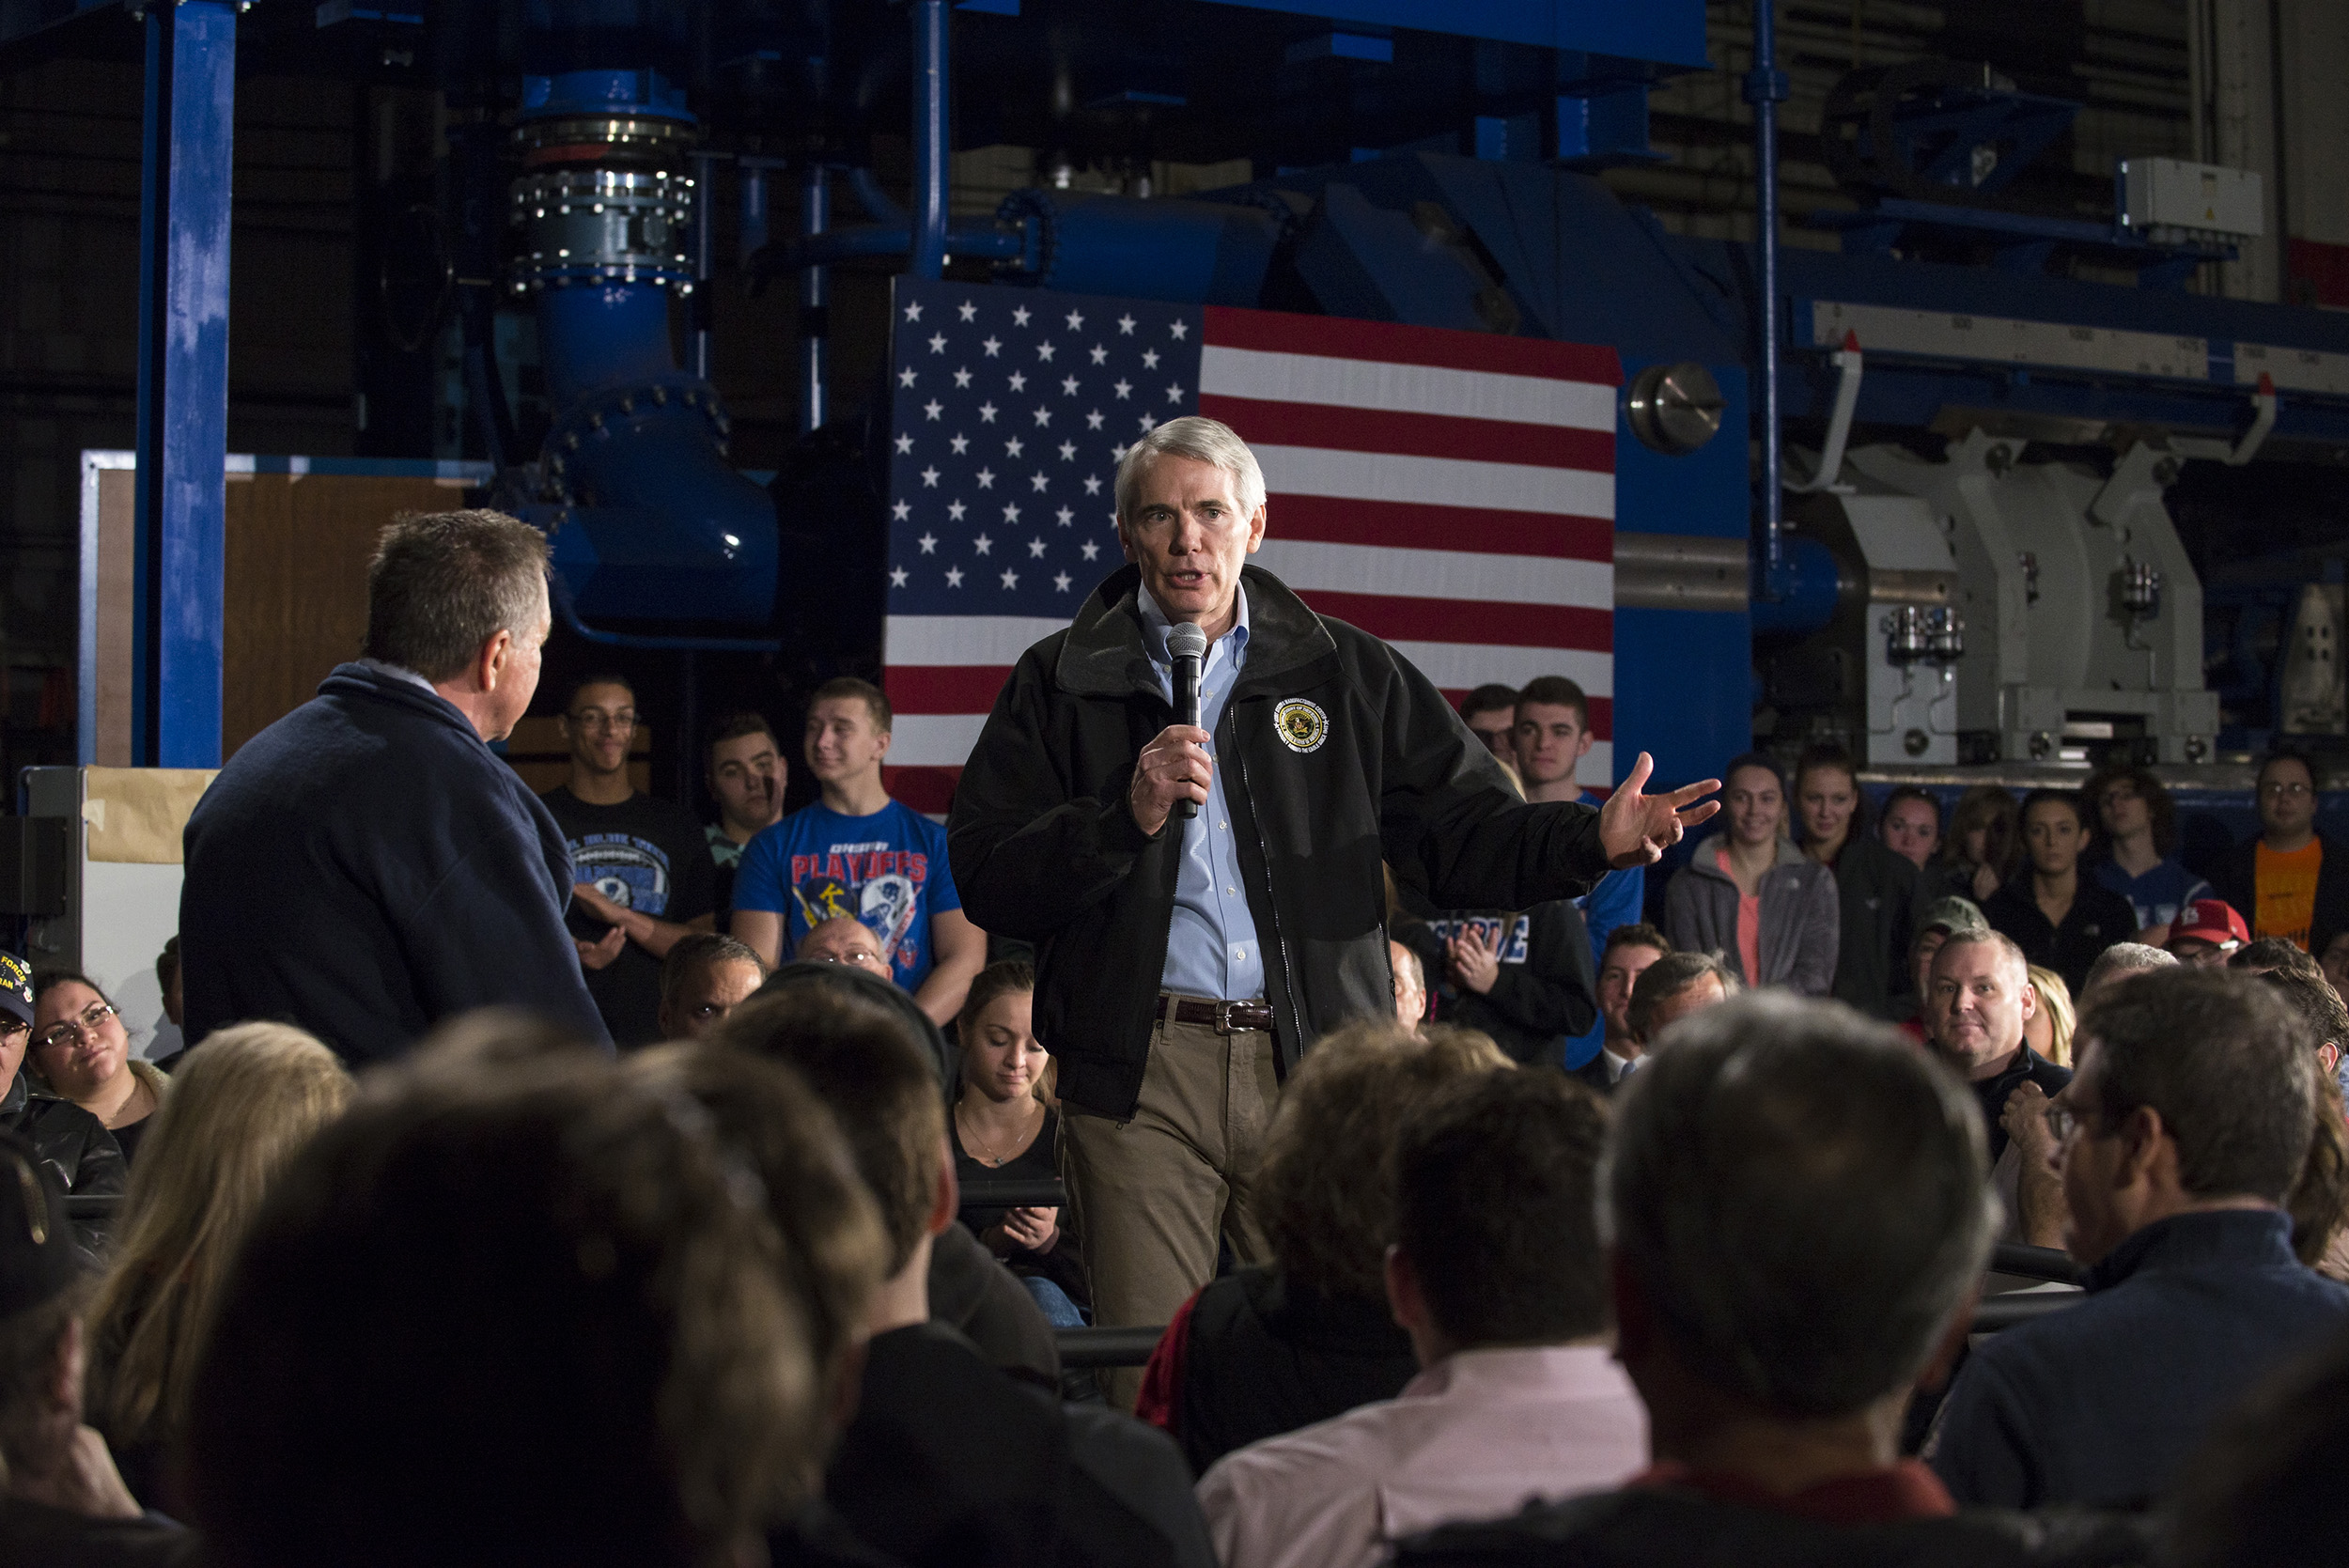 Ohio Senator Rob Portman speaks to supporters at a town hall meeting  in Youngstown, Ohio on March 14, 2016. (Angelo Merendino—Getty Images)